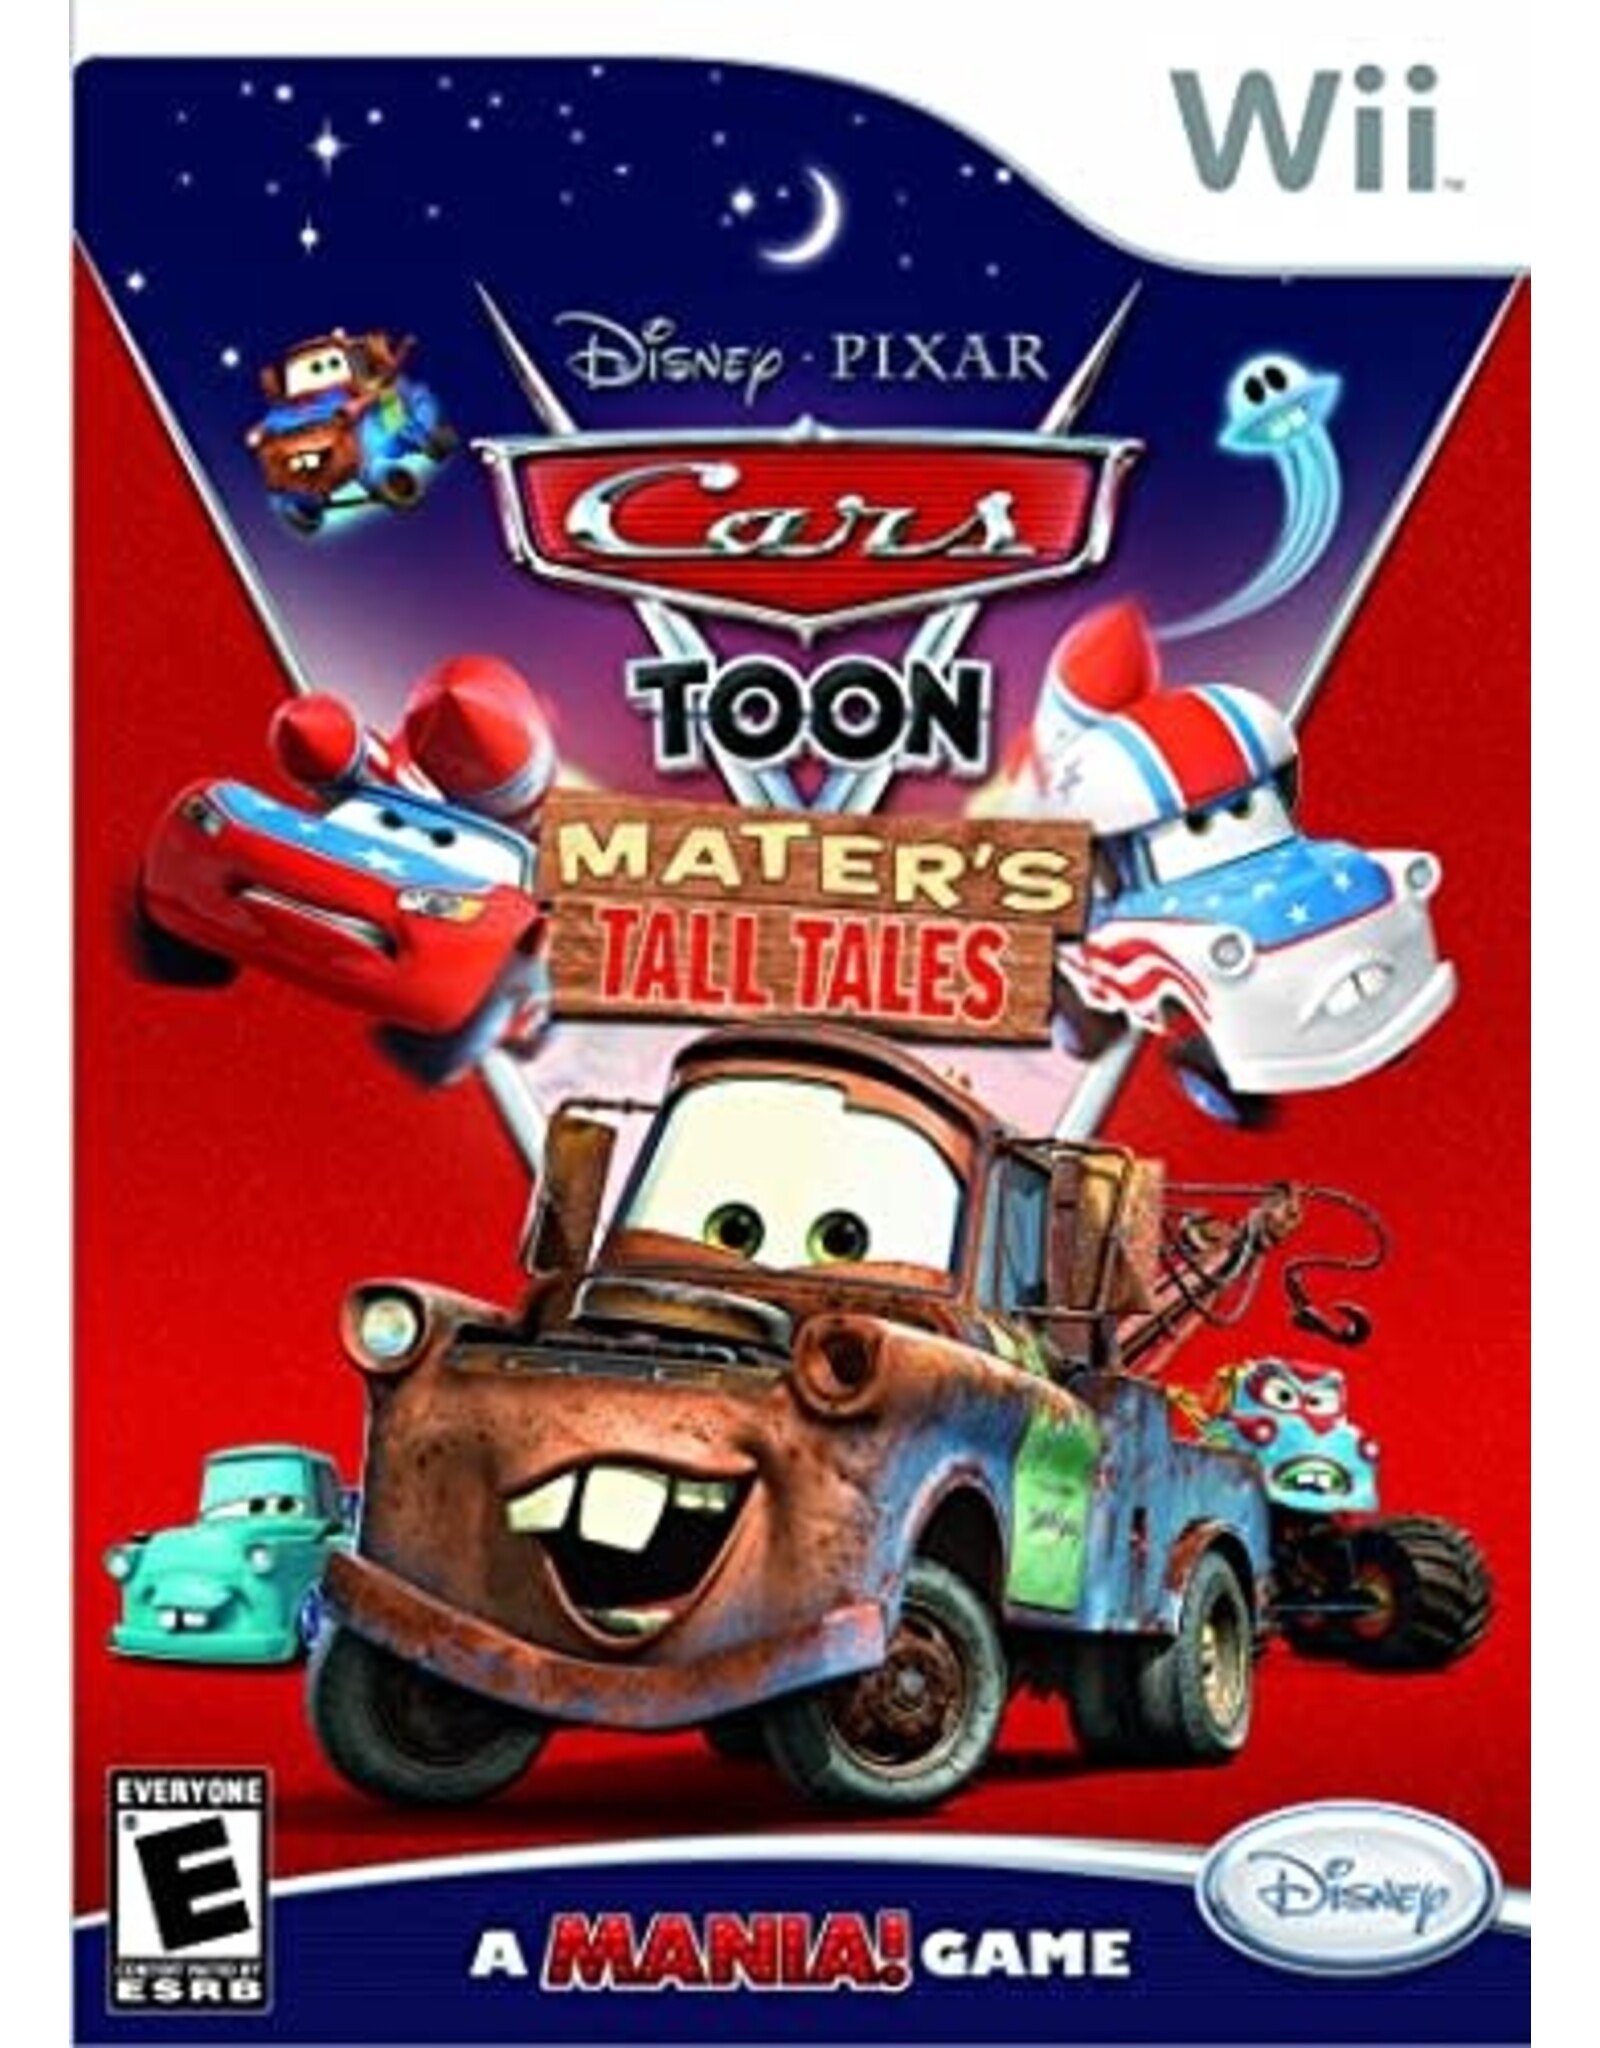 Wii Cars Toon: Mater's Tall Tales (No Manual)